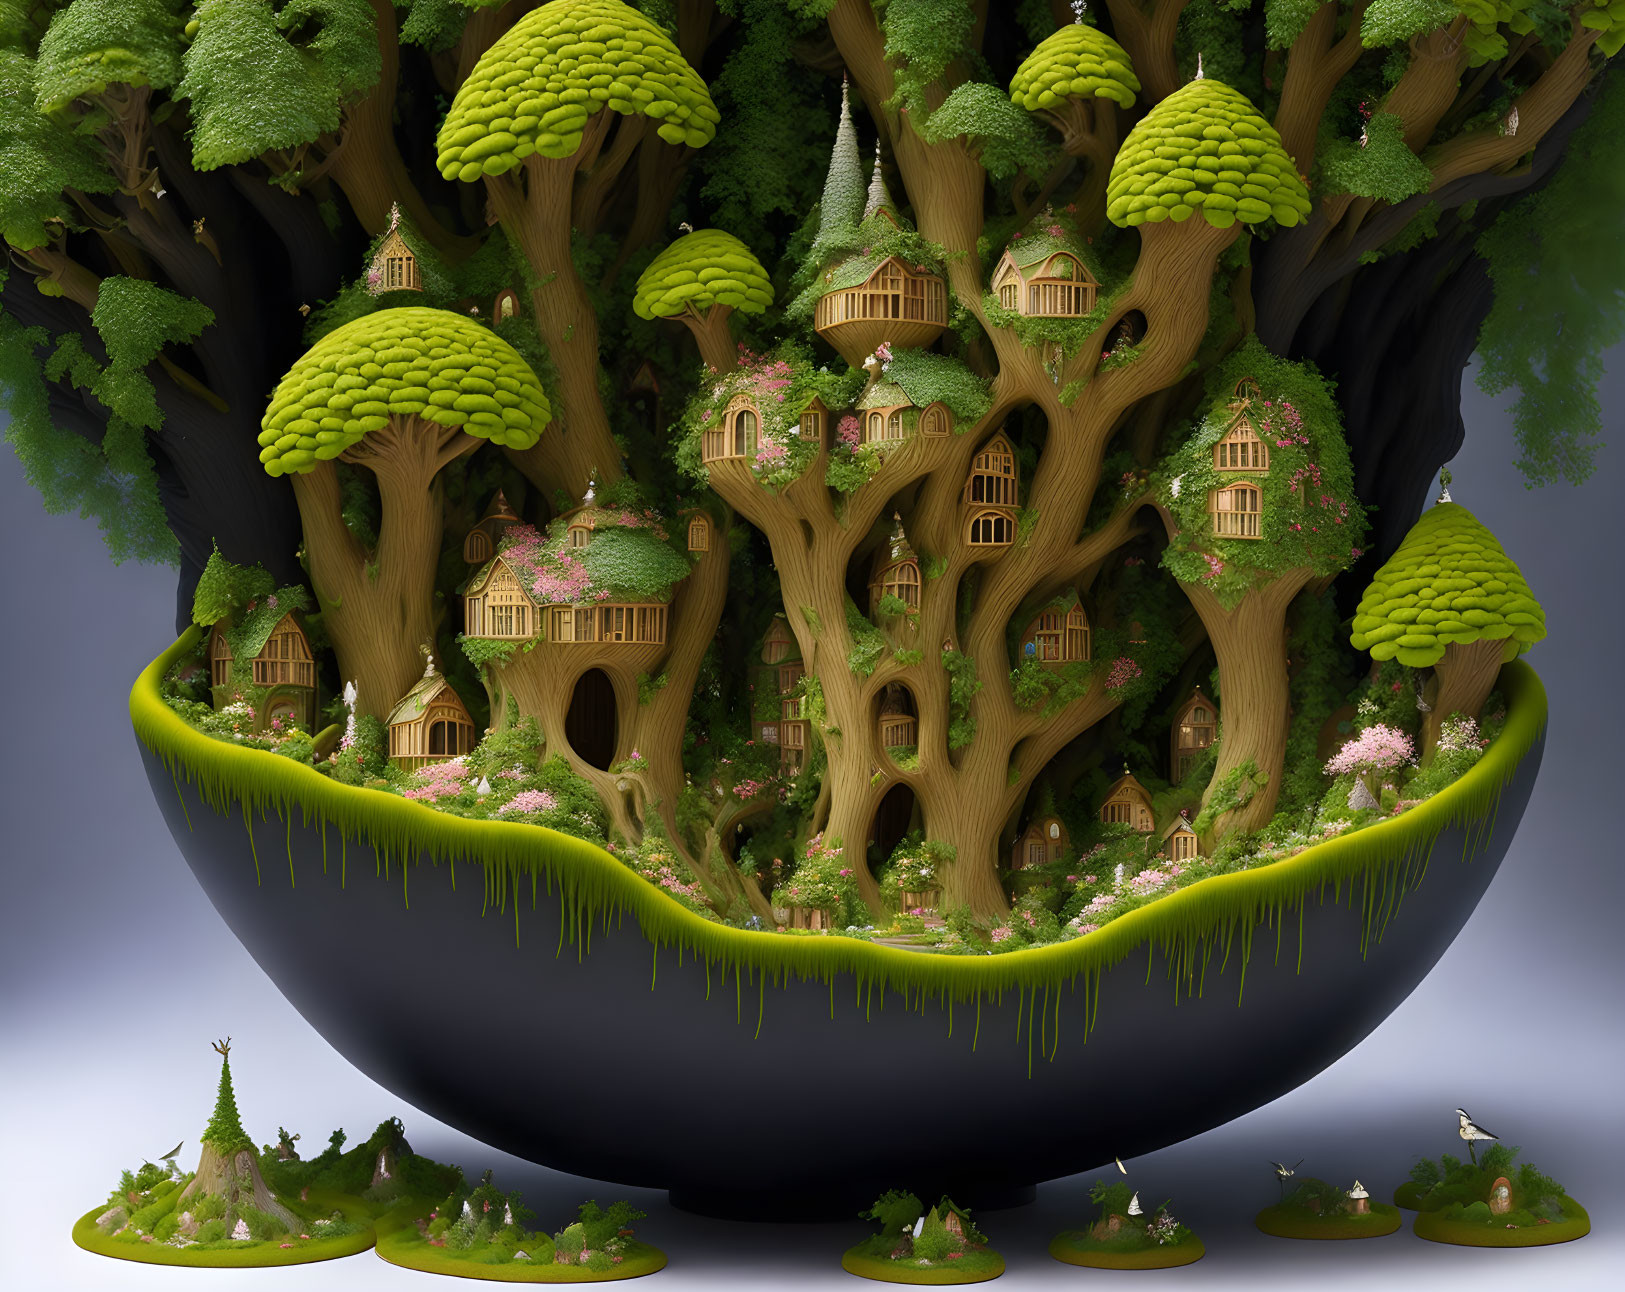 Fantastical spherical tree with lush greenery and whimsical treehouses interconnected by bridges